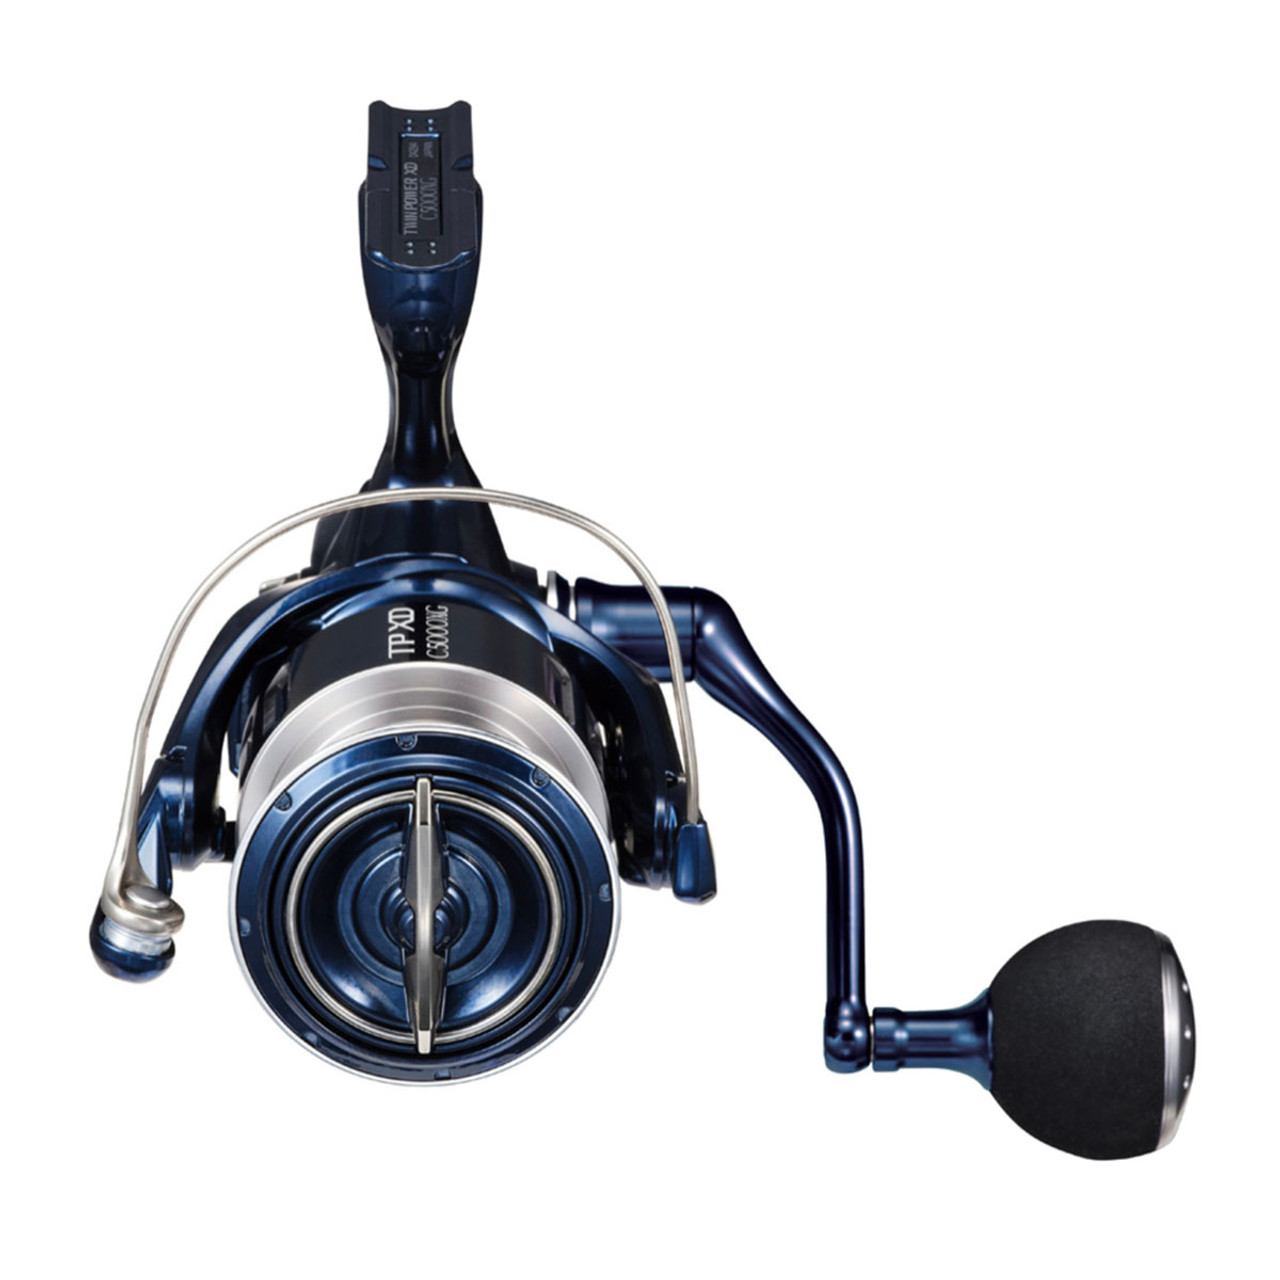 Shimano Twin Power XD Spinning Reels